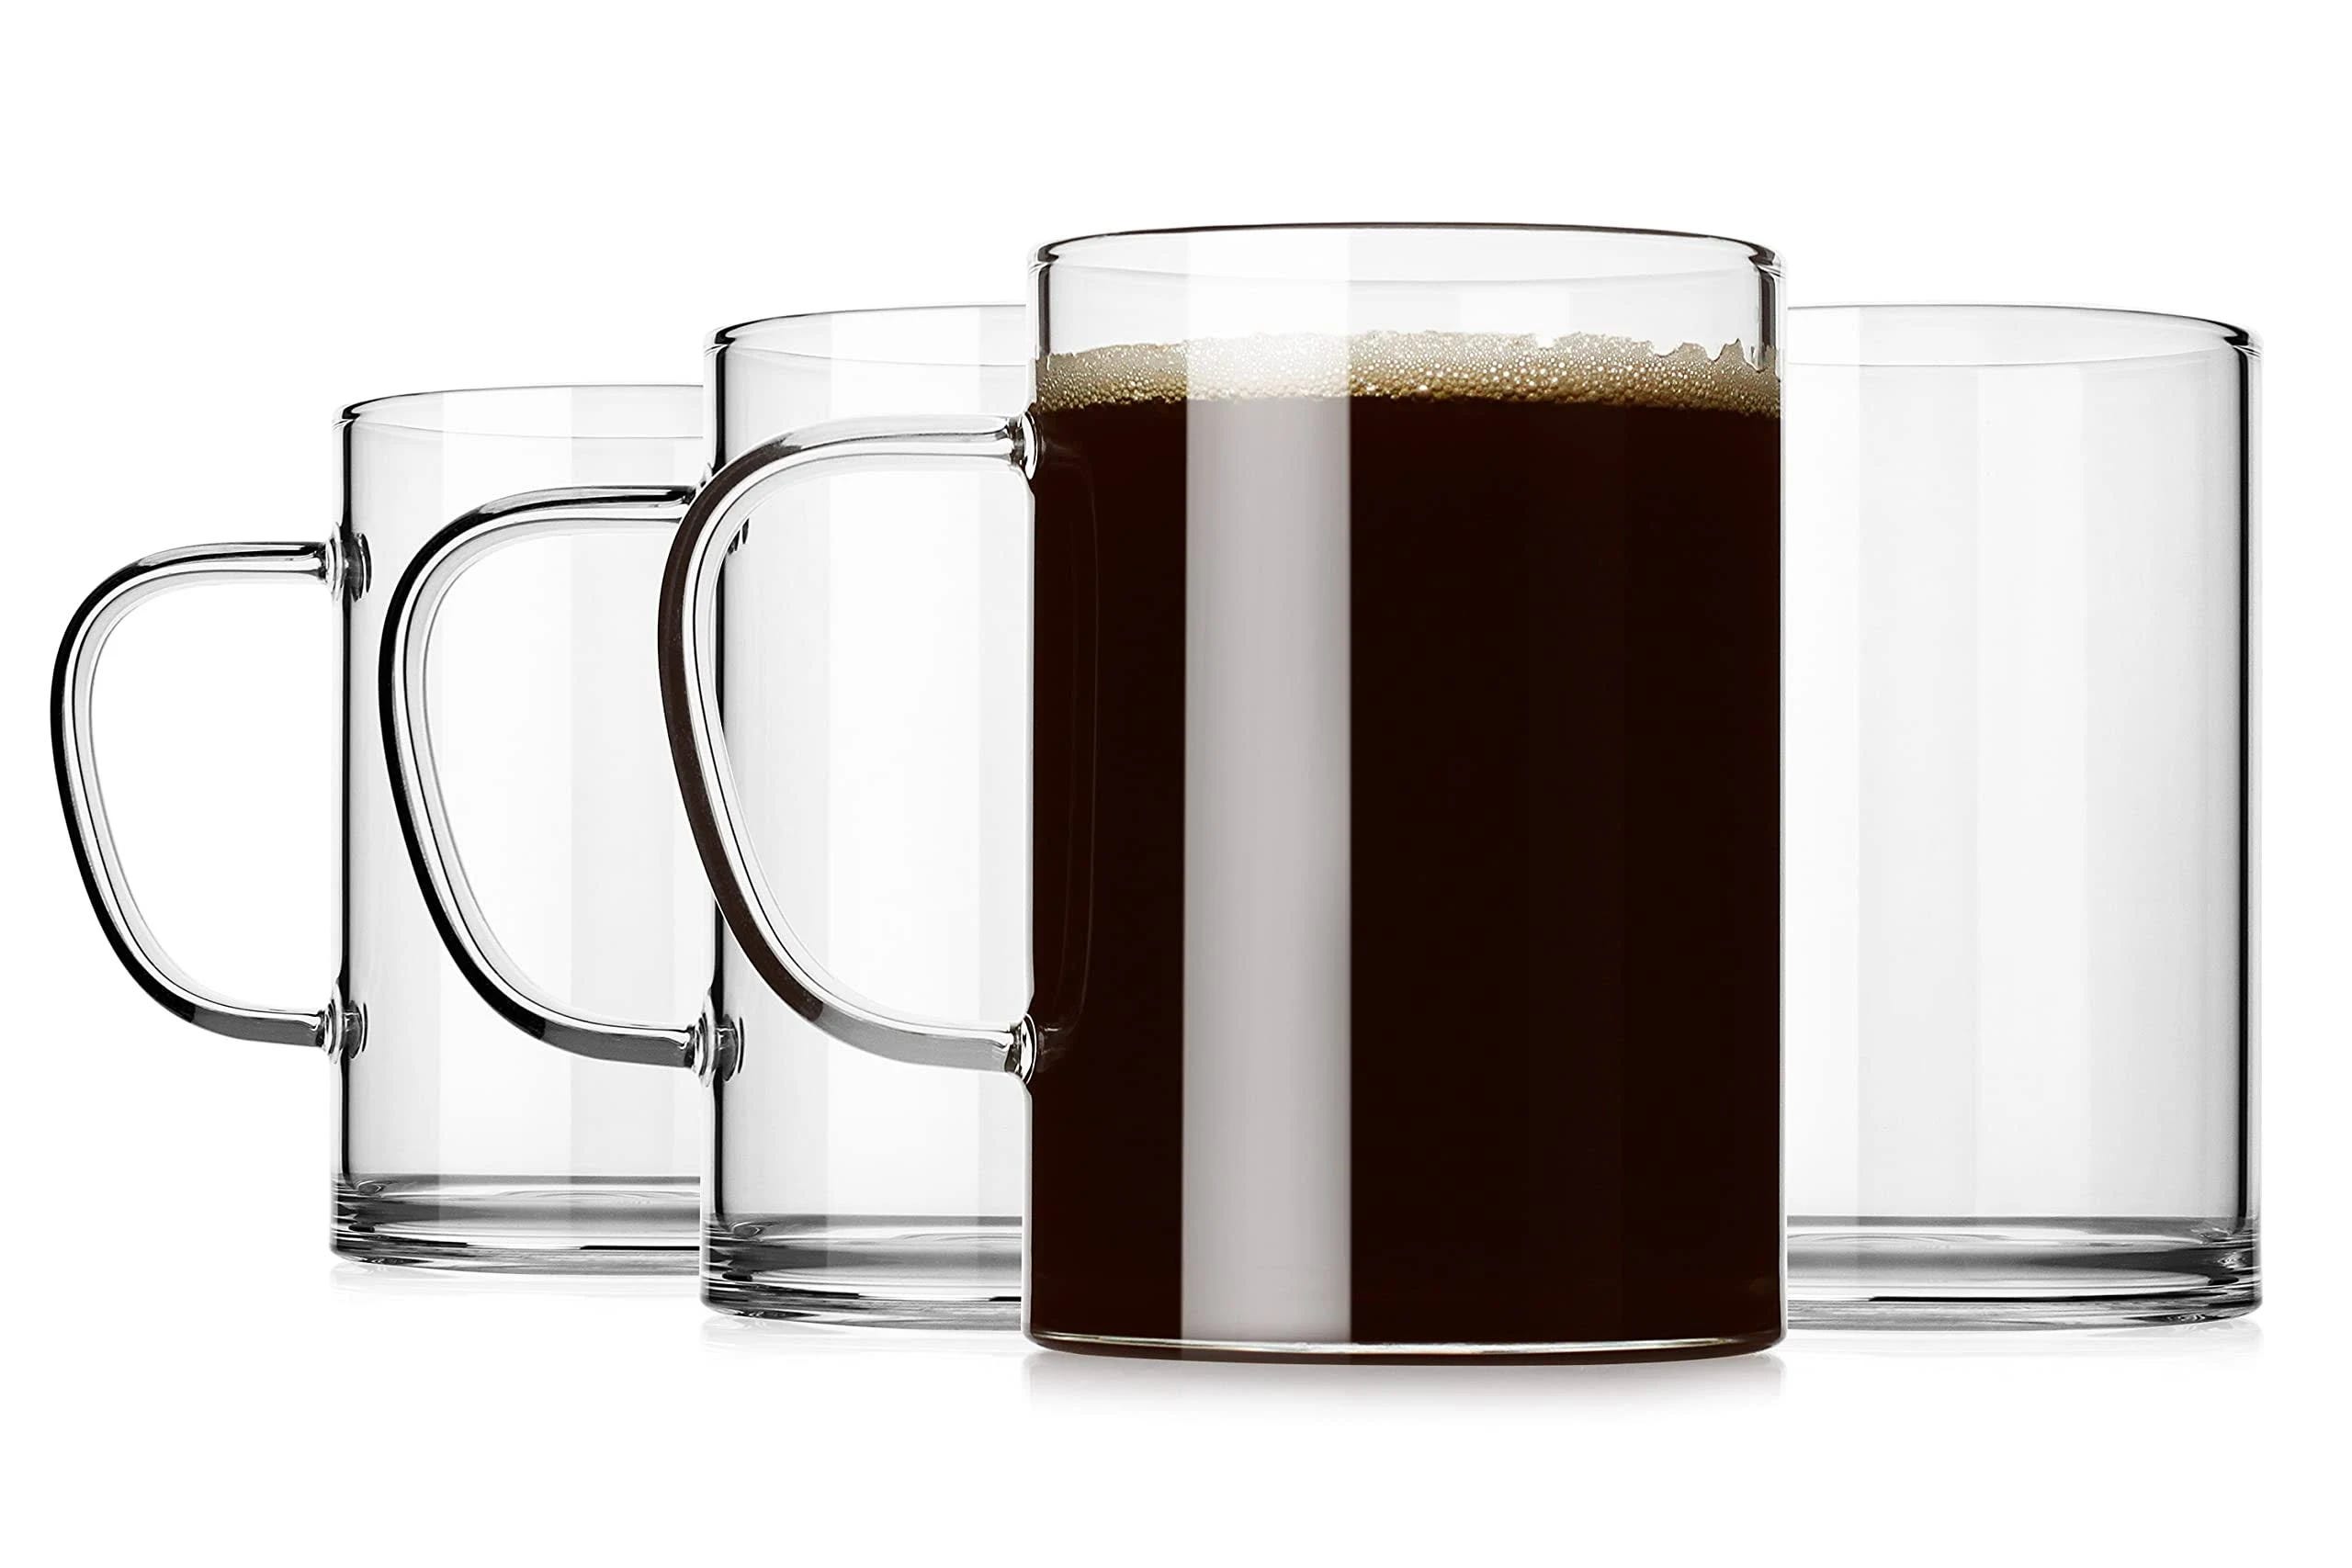 LUXU Glass Coffee Mugs: Crystal Clear and Spill-Proof 16 oz Cups Set (4 Pack) | Image